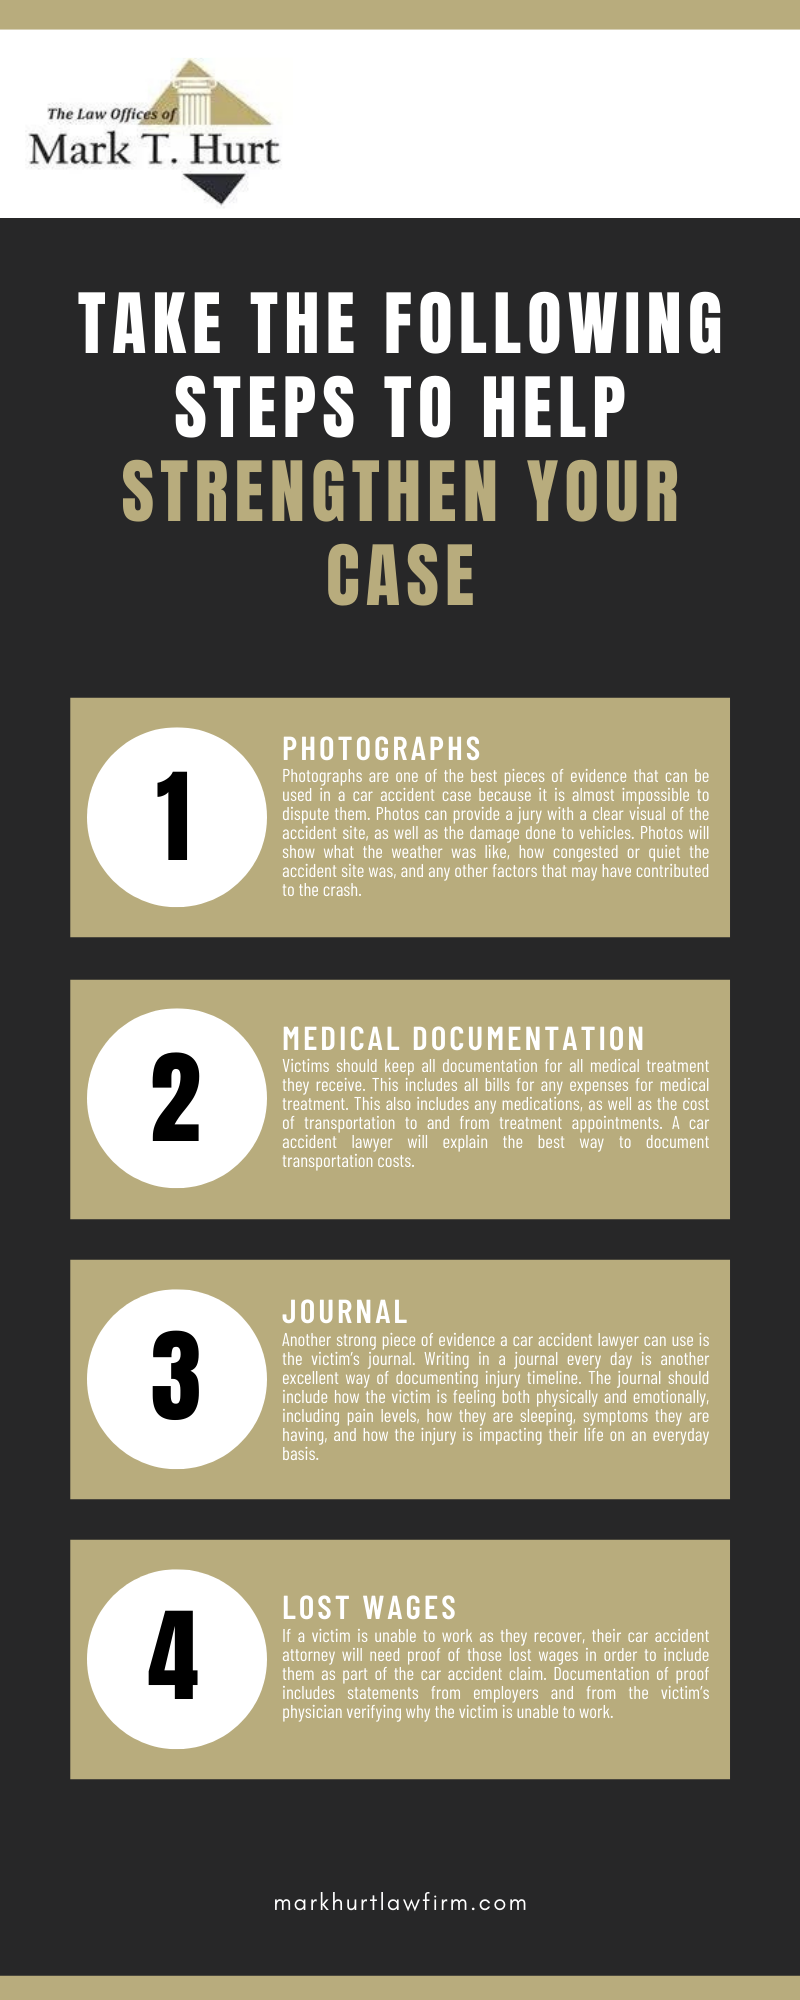 TAKE THE FOLLOWING STEPS TO HELP STRENGTHEN YOUR CASE INFOGRAPHIC